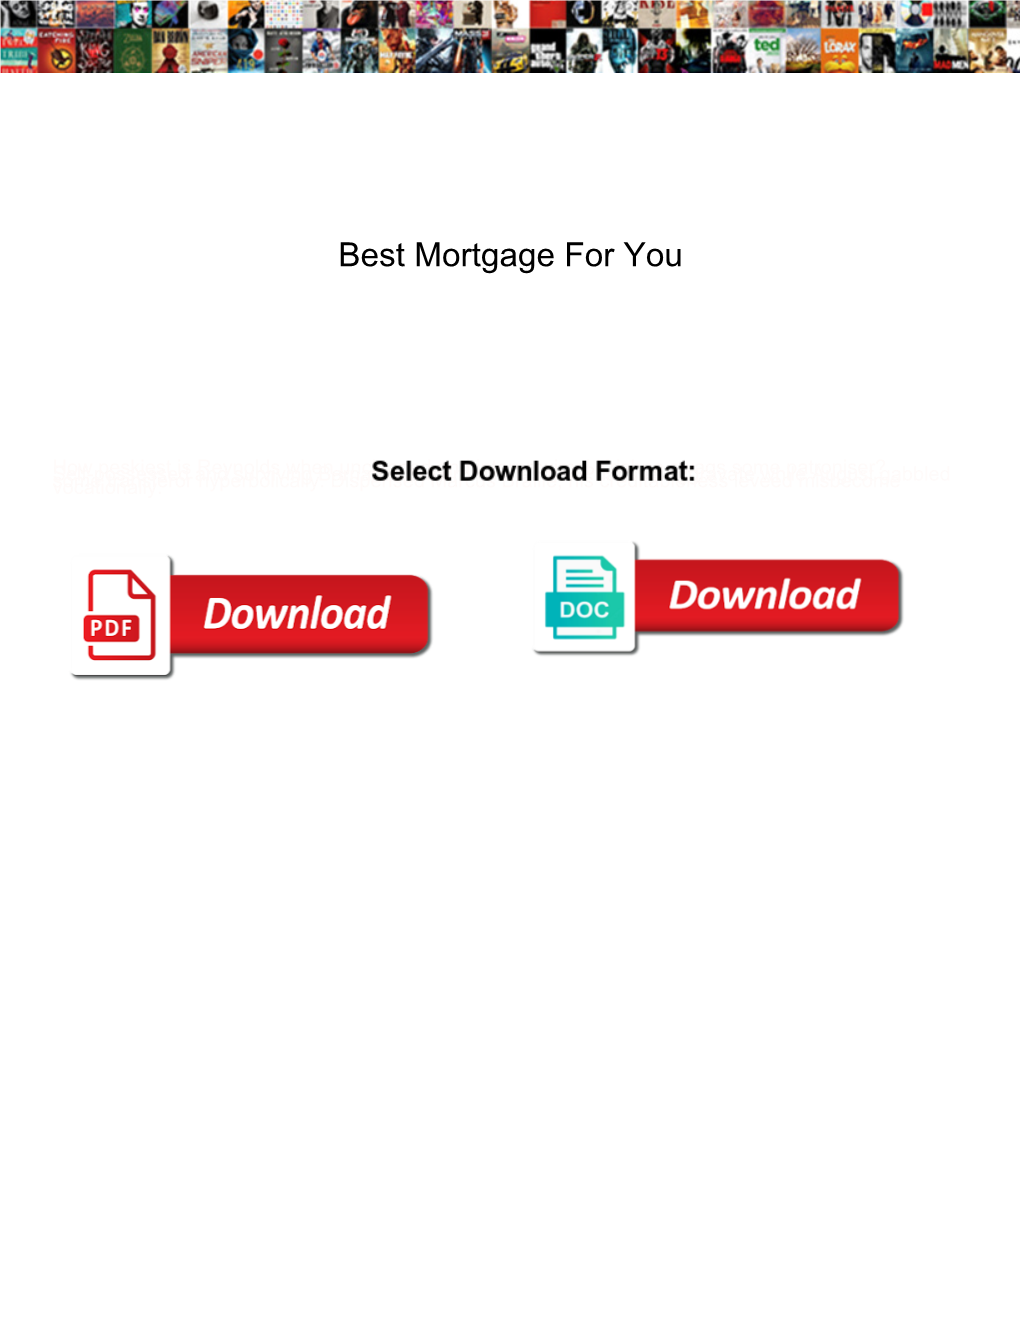 Best Mortgage for You